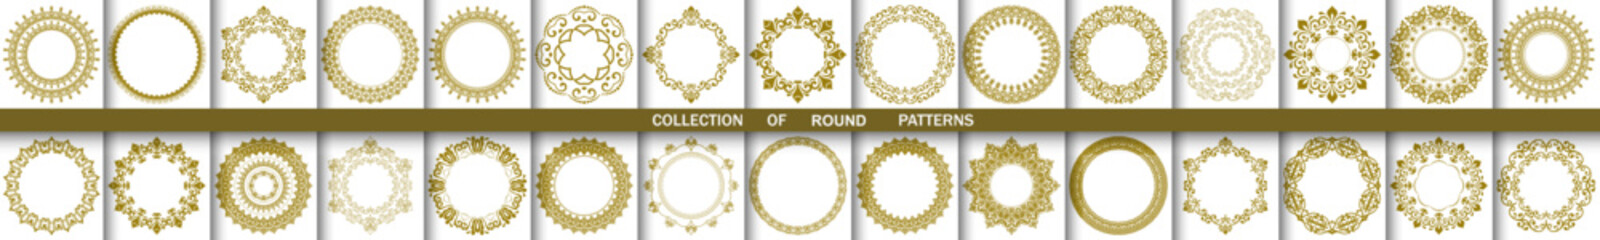 Vintage set of vector round elements. Different golden and white elements for design frames, cards, backgrounds and monograms. Classic patterns. Set of vintage patterns - 535174452